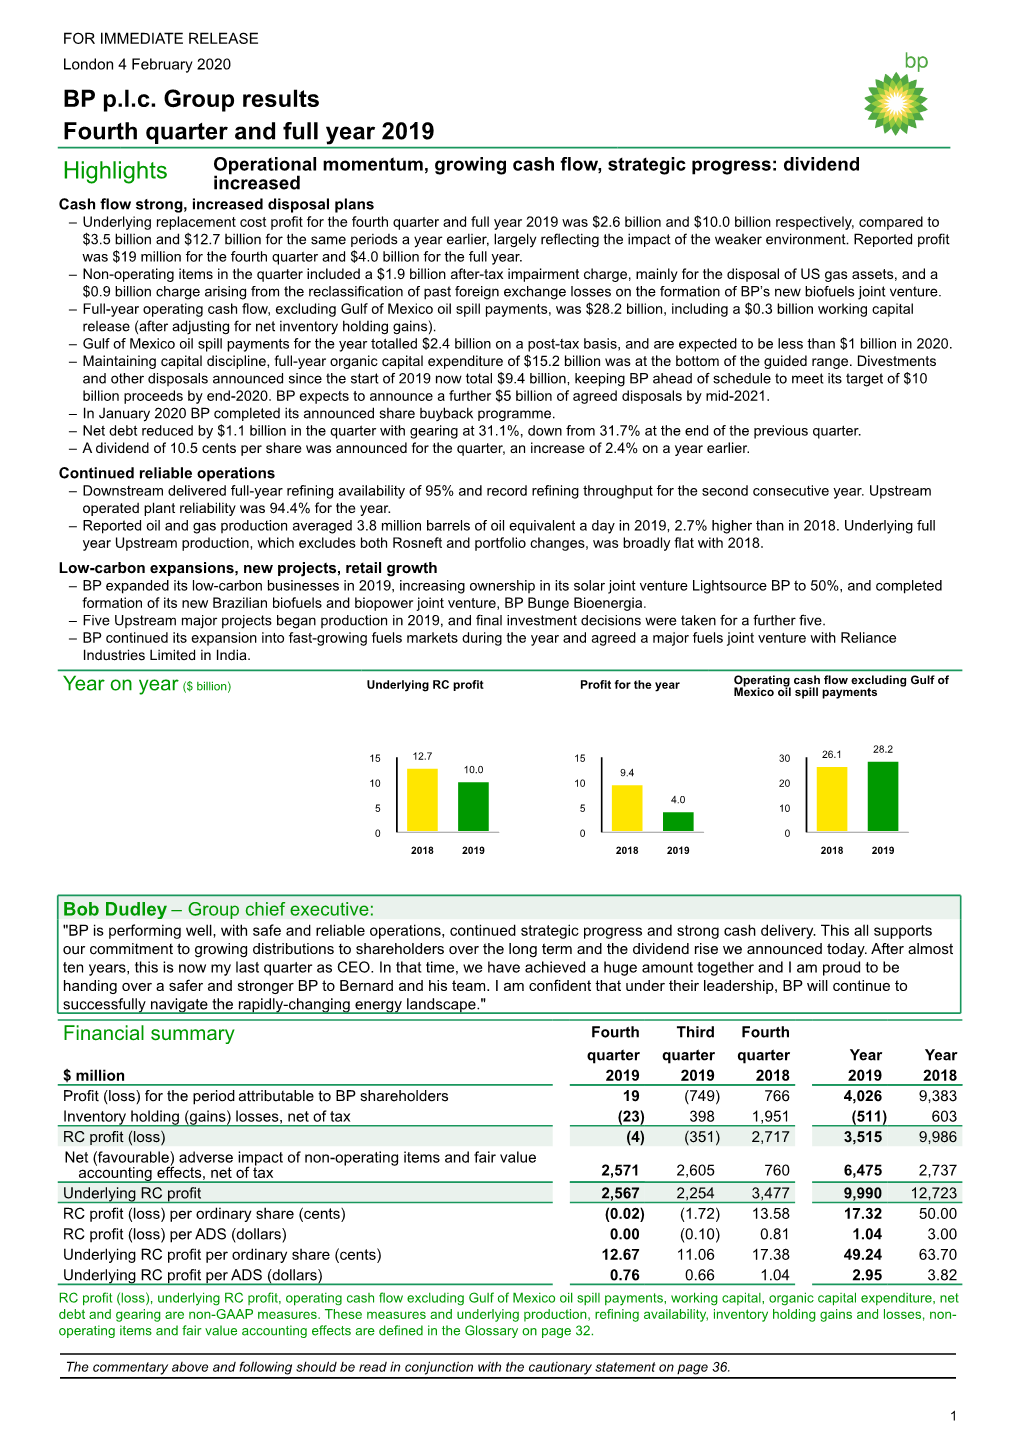 BP P.L.C. Group Results Fourth Quarter and Full Year 2019 Highlights